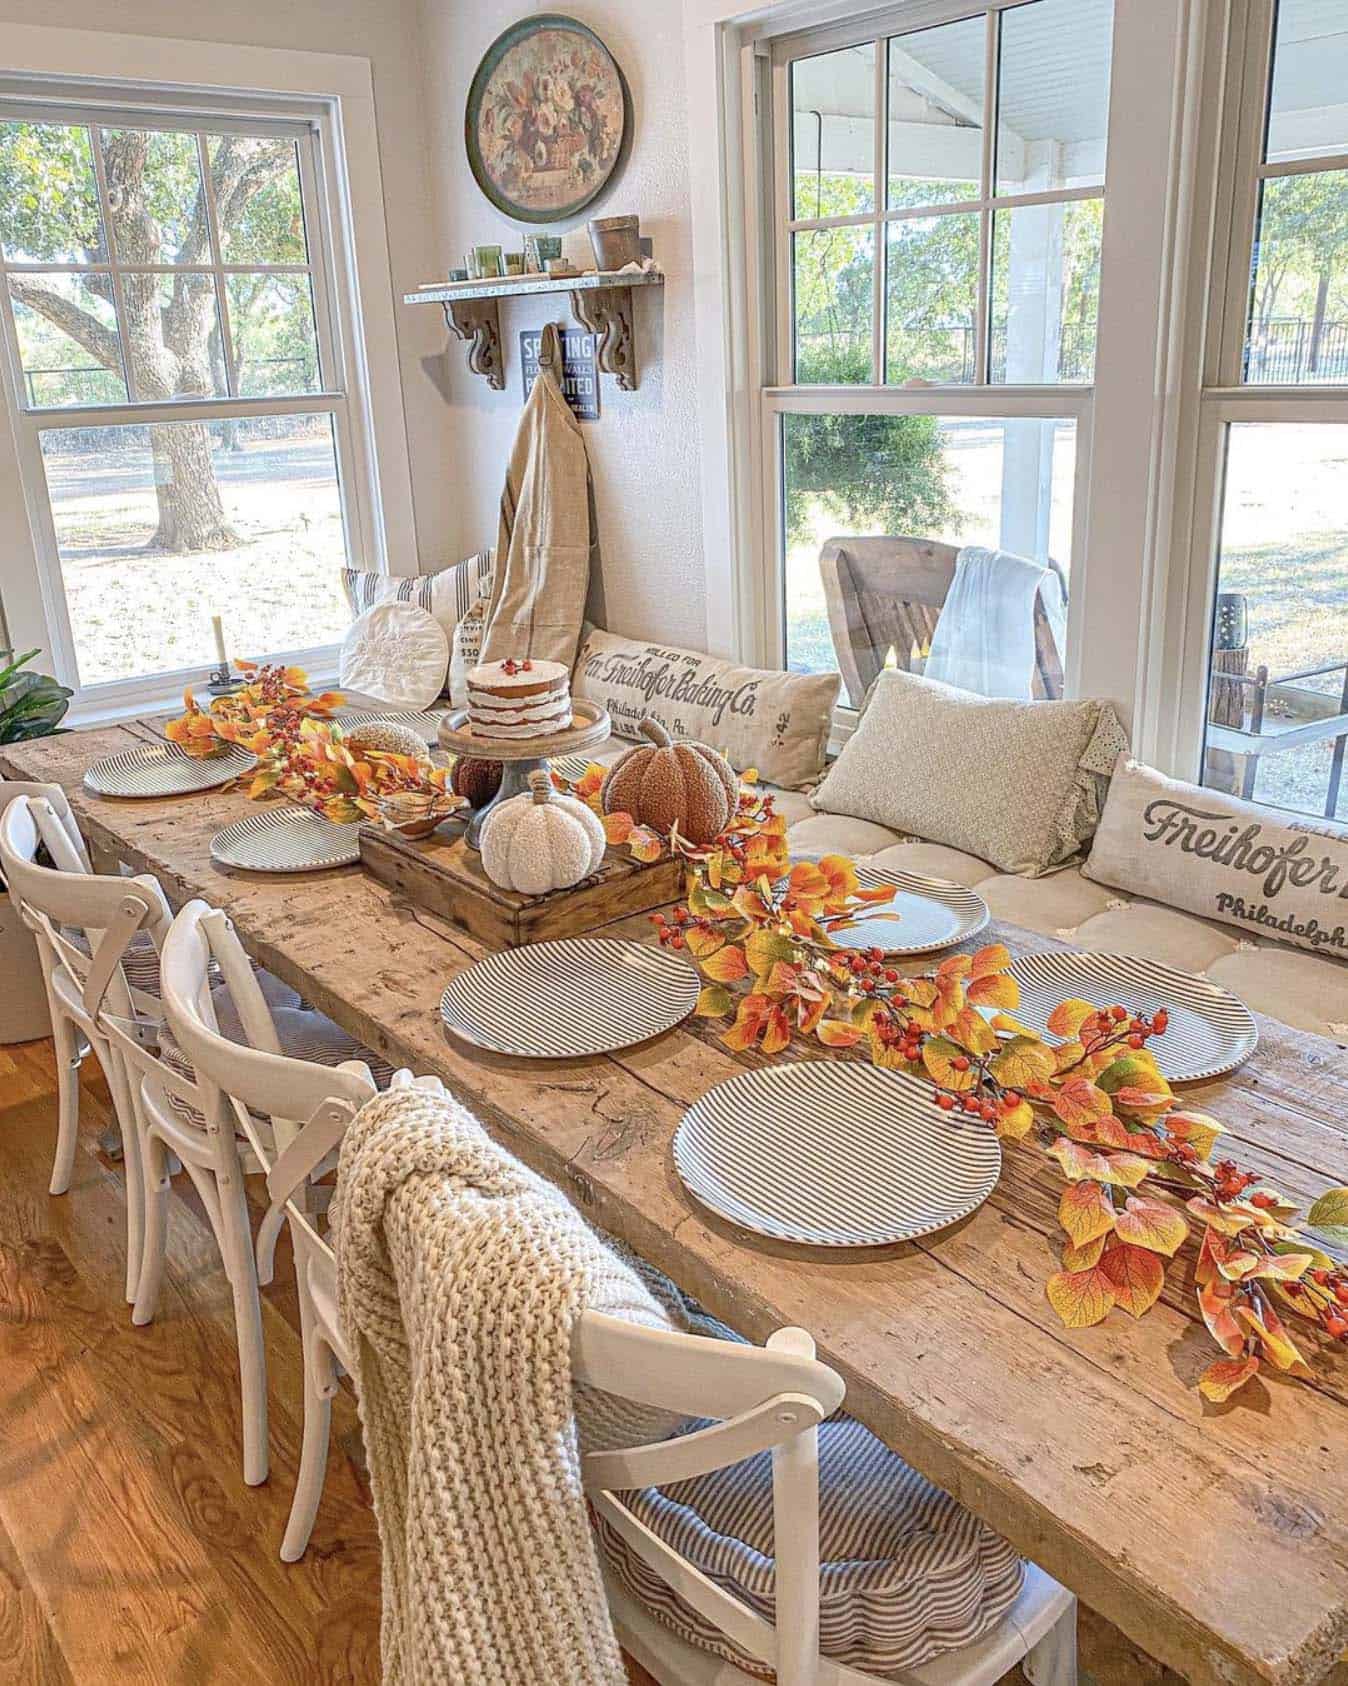 farmhouse style dining table decorated for fall